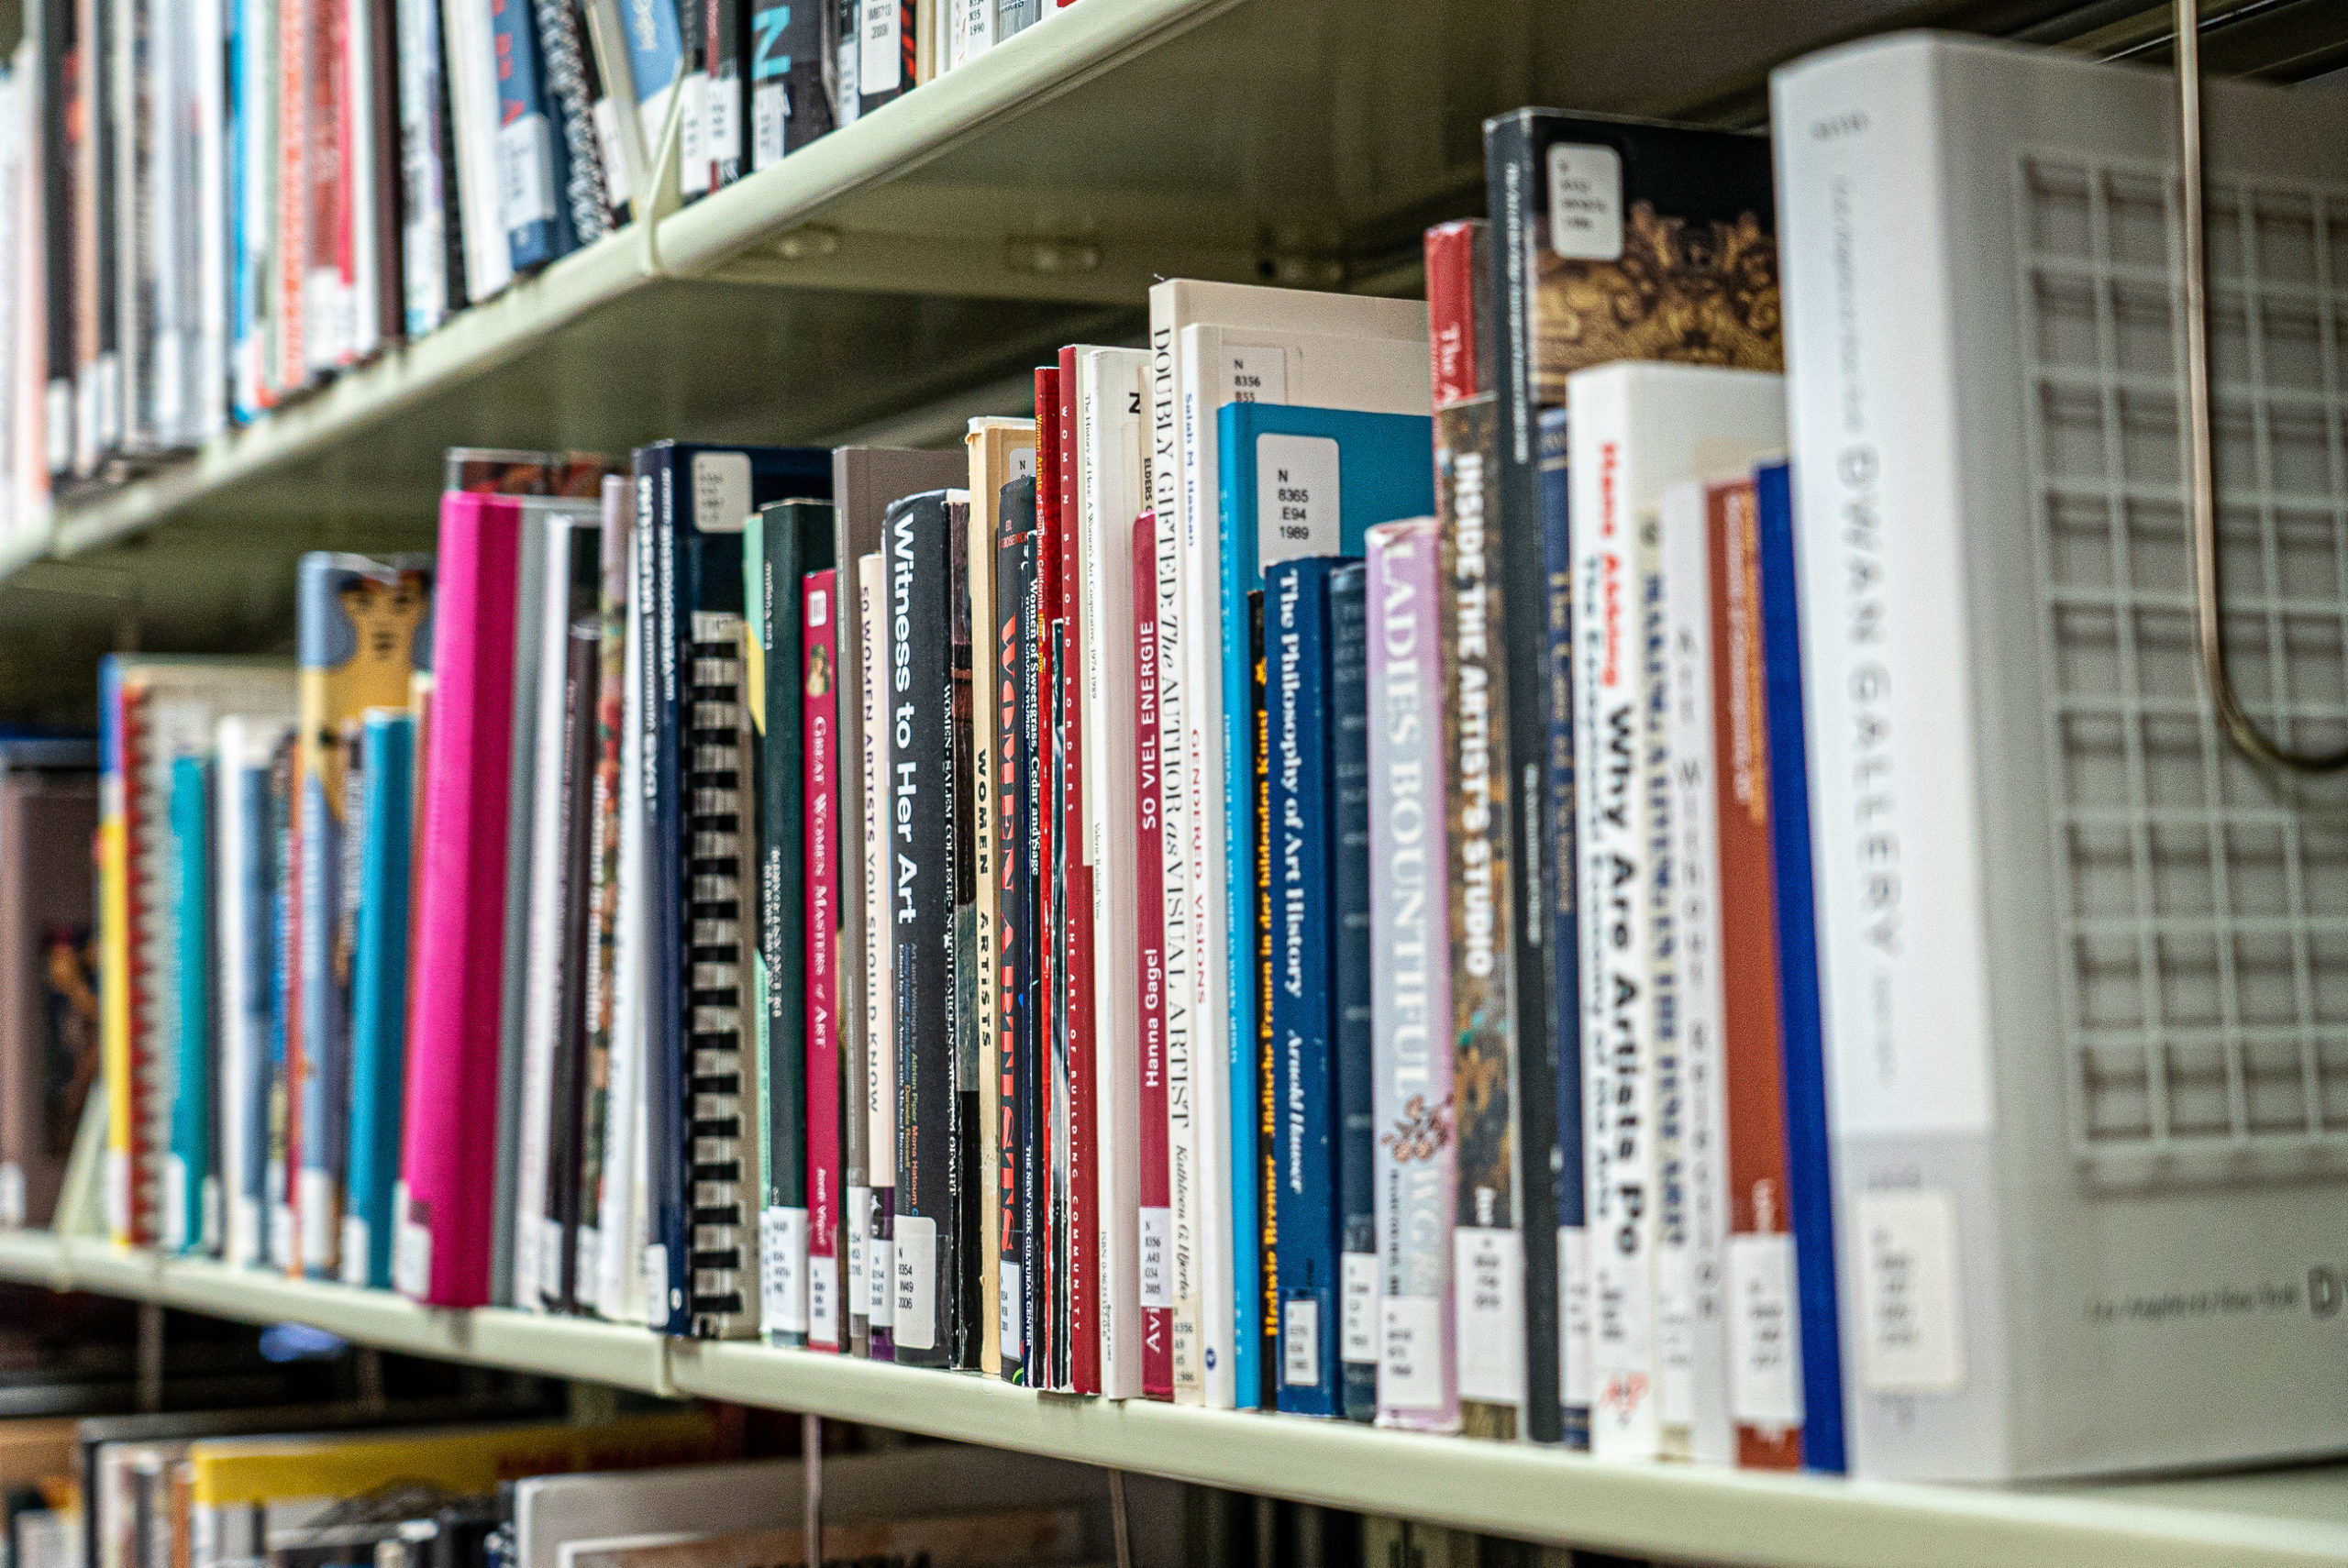 A bookshelf packed with colorful books about women artists.